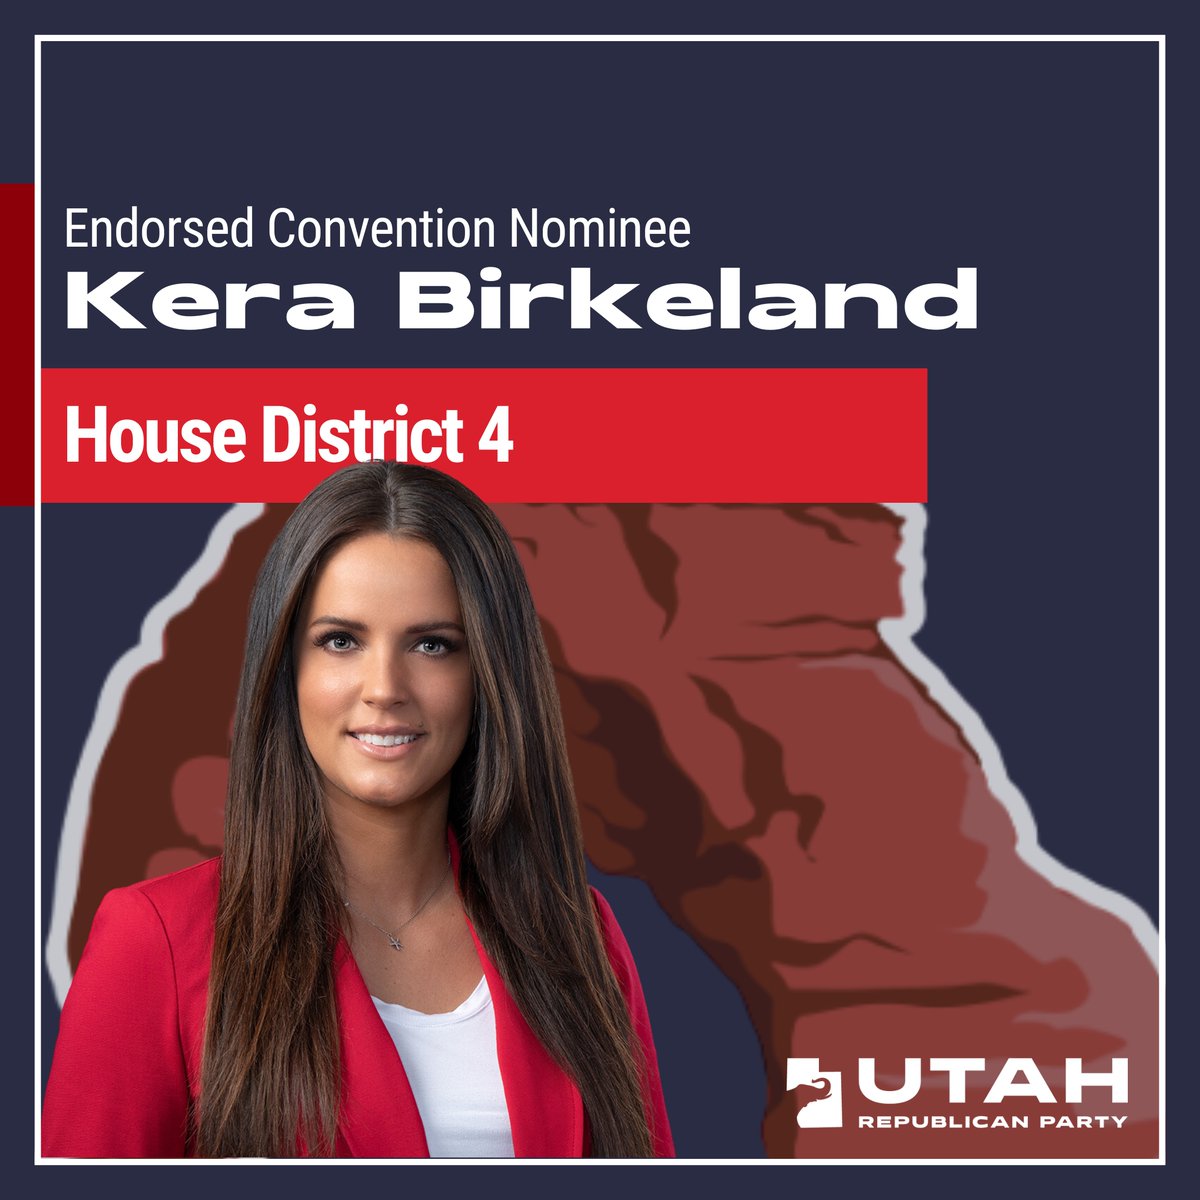 Kera Birkeland is the UT GOP's Endorsed Convention Nominee for House District 4! Congratulations Kera!